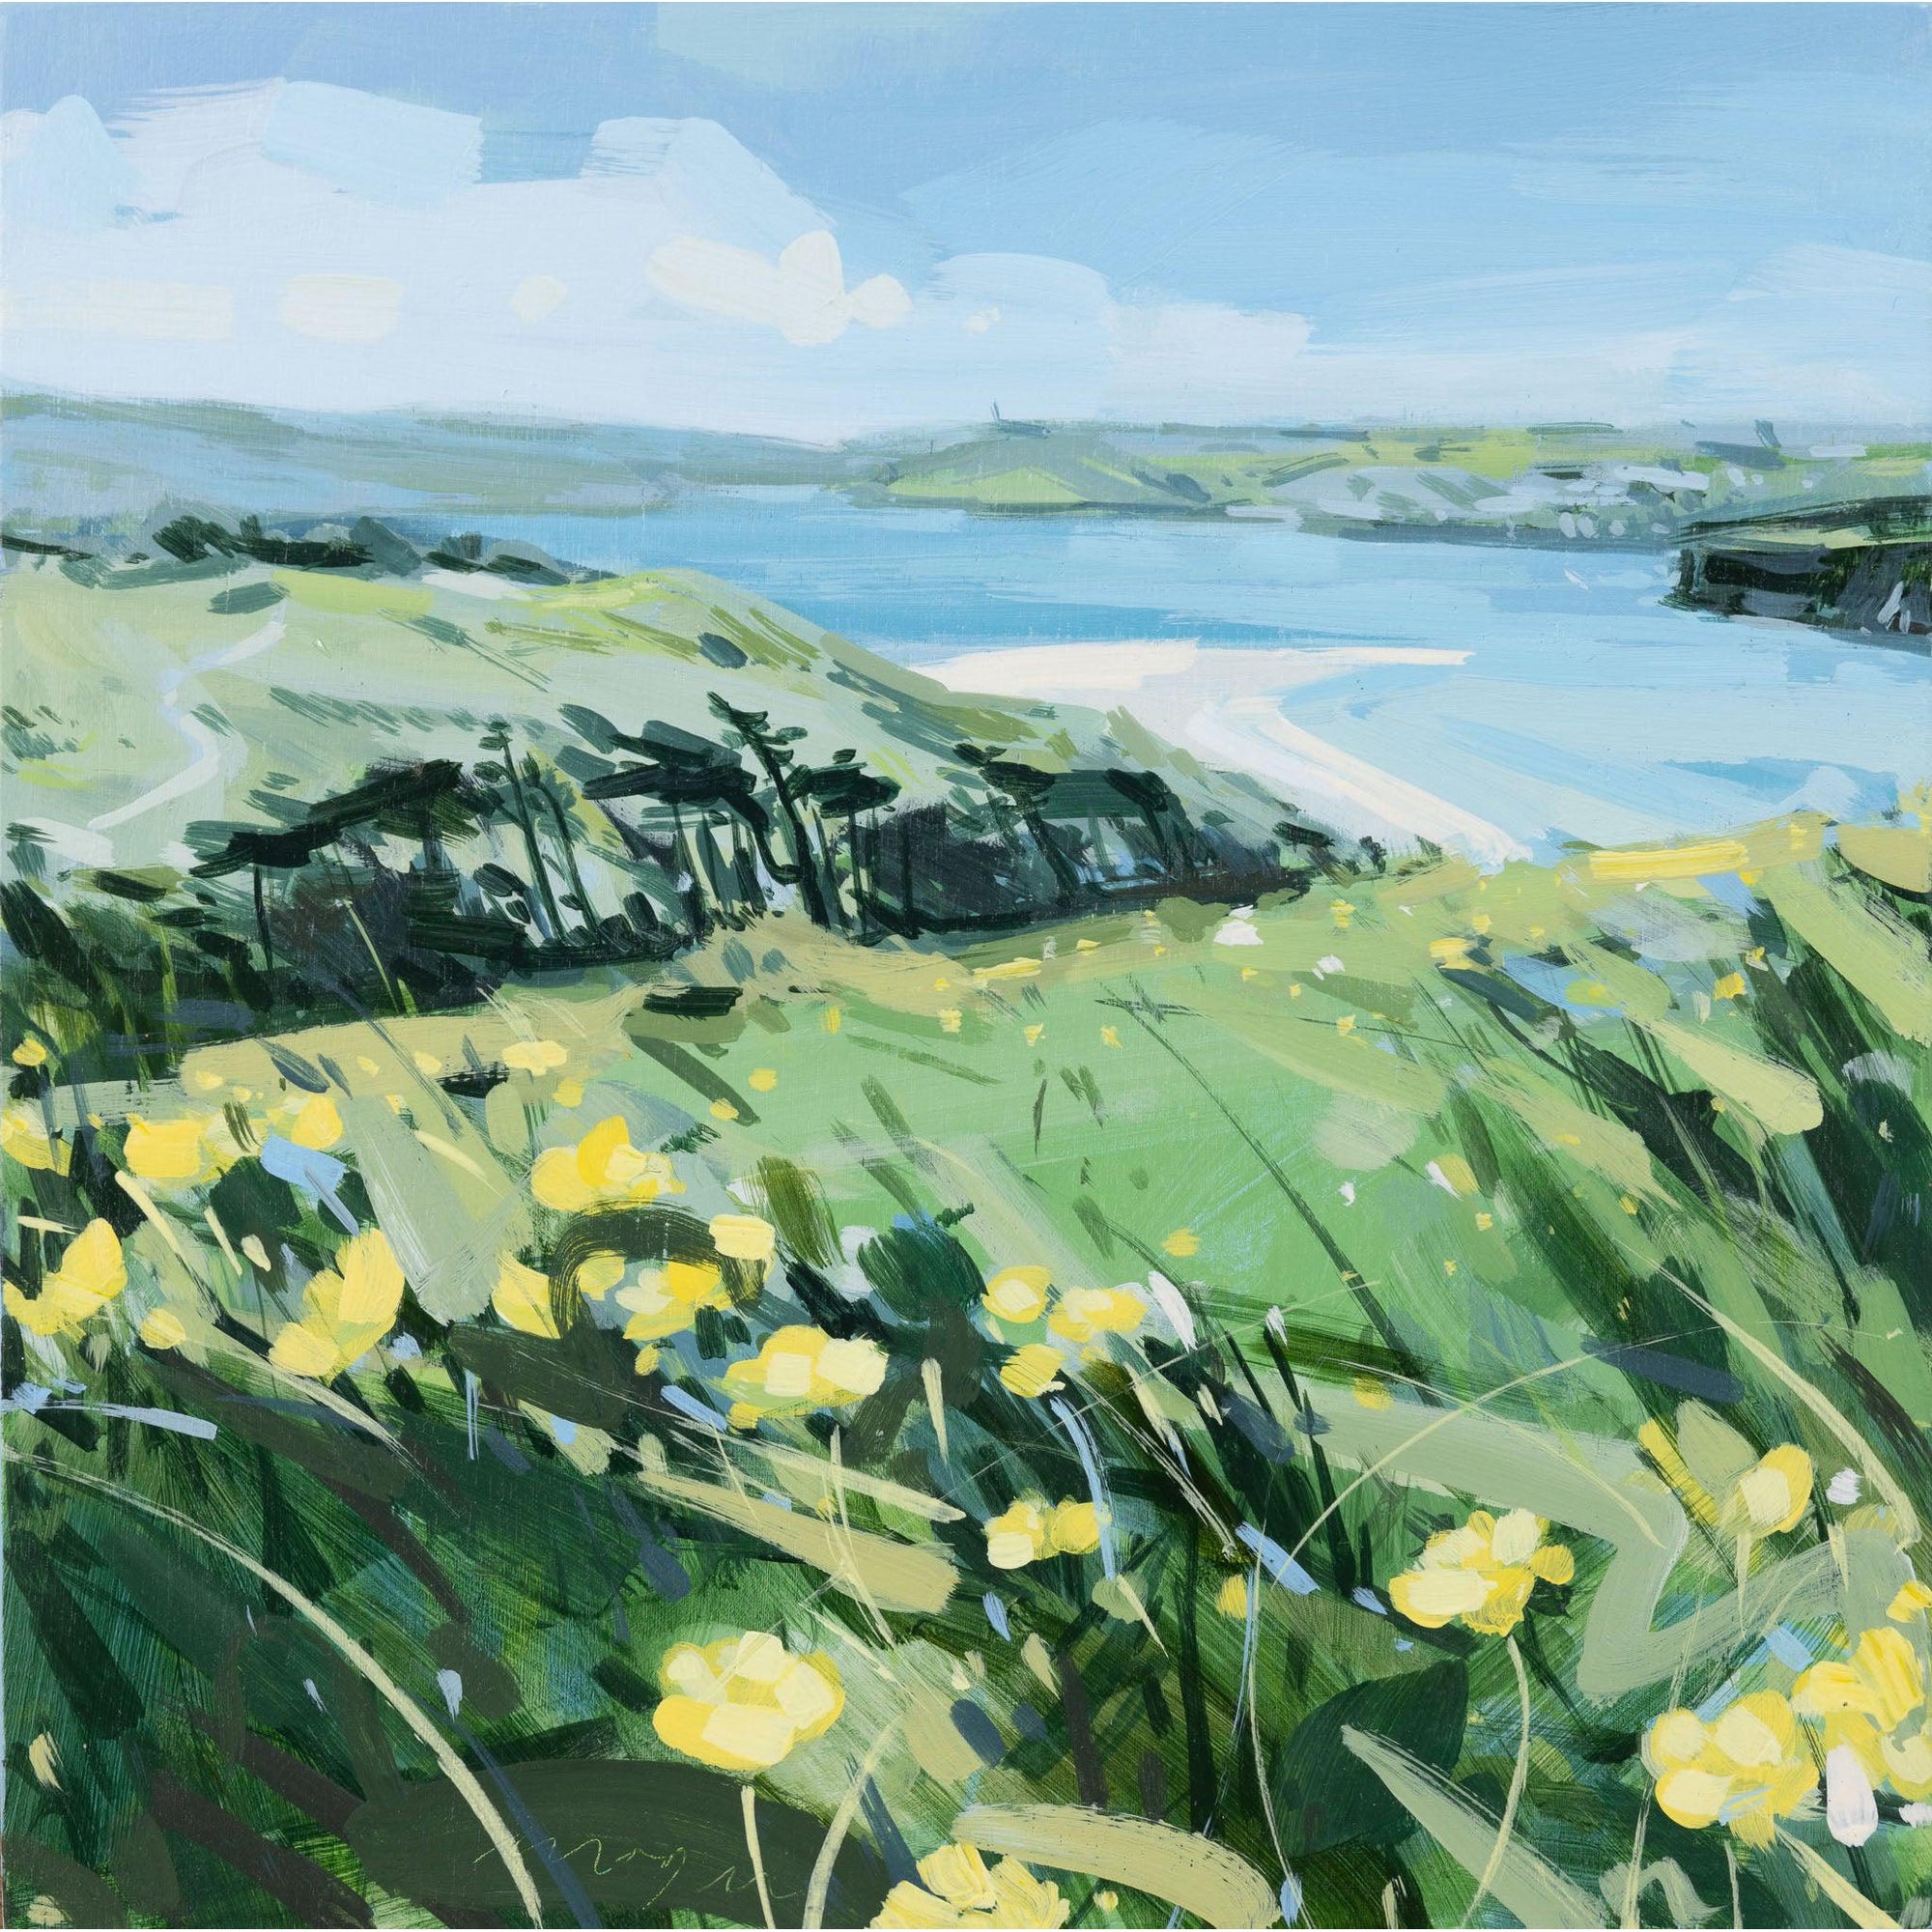 ‘Buttercup Hilltop' acrylic on wooden block by Imogen Bone, available at Padstow Gallery, Cornwall